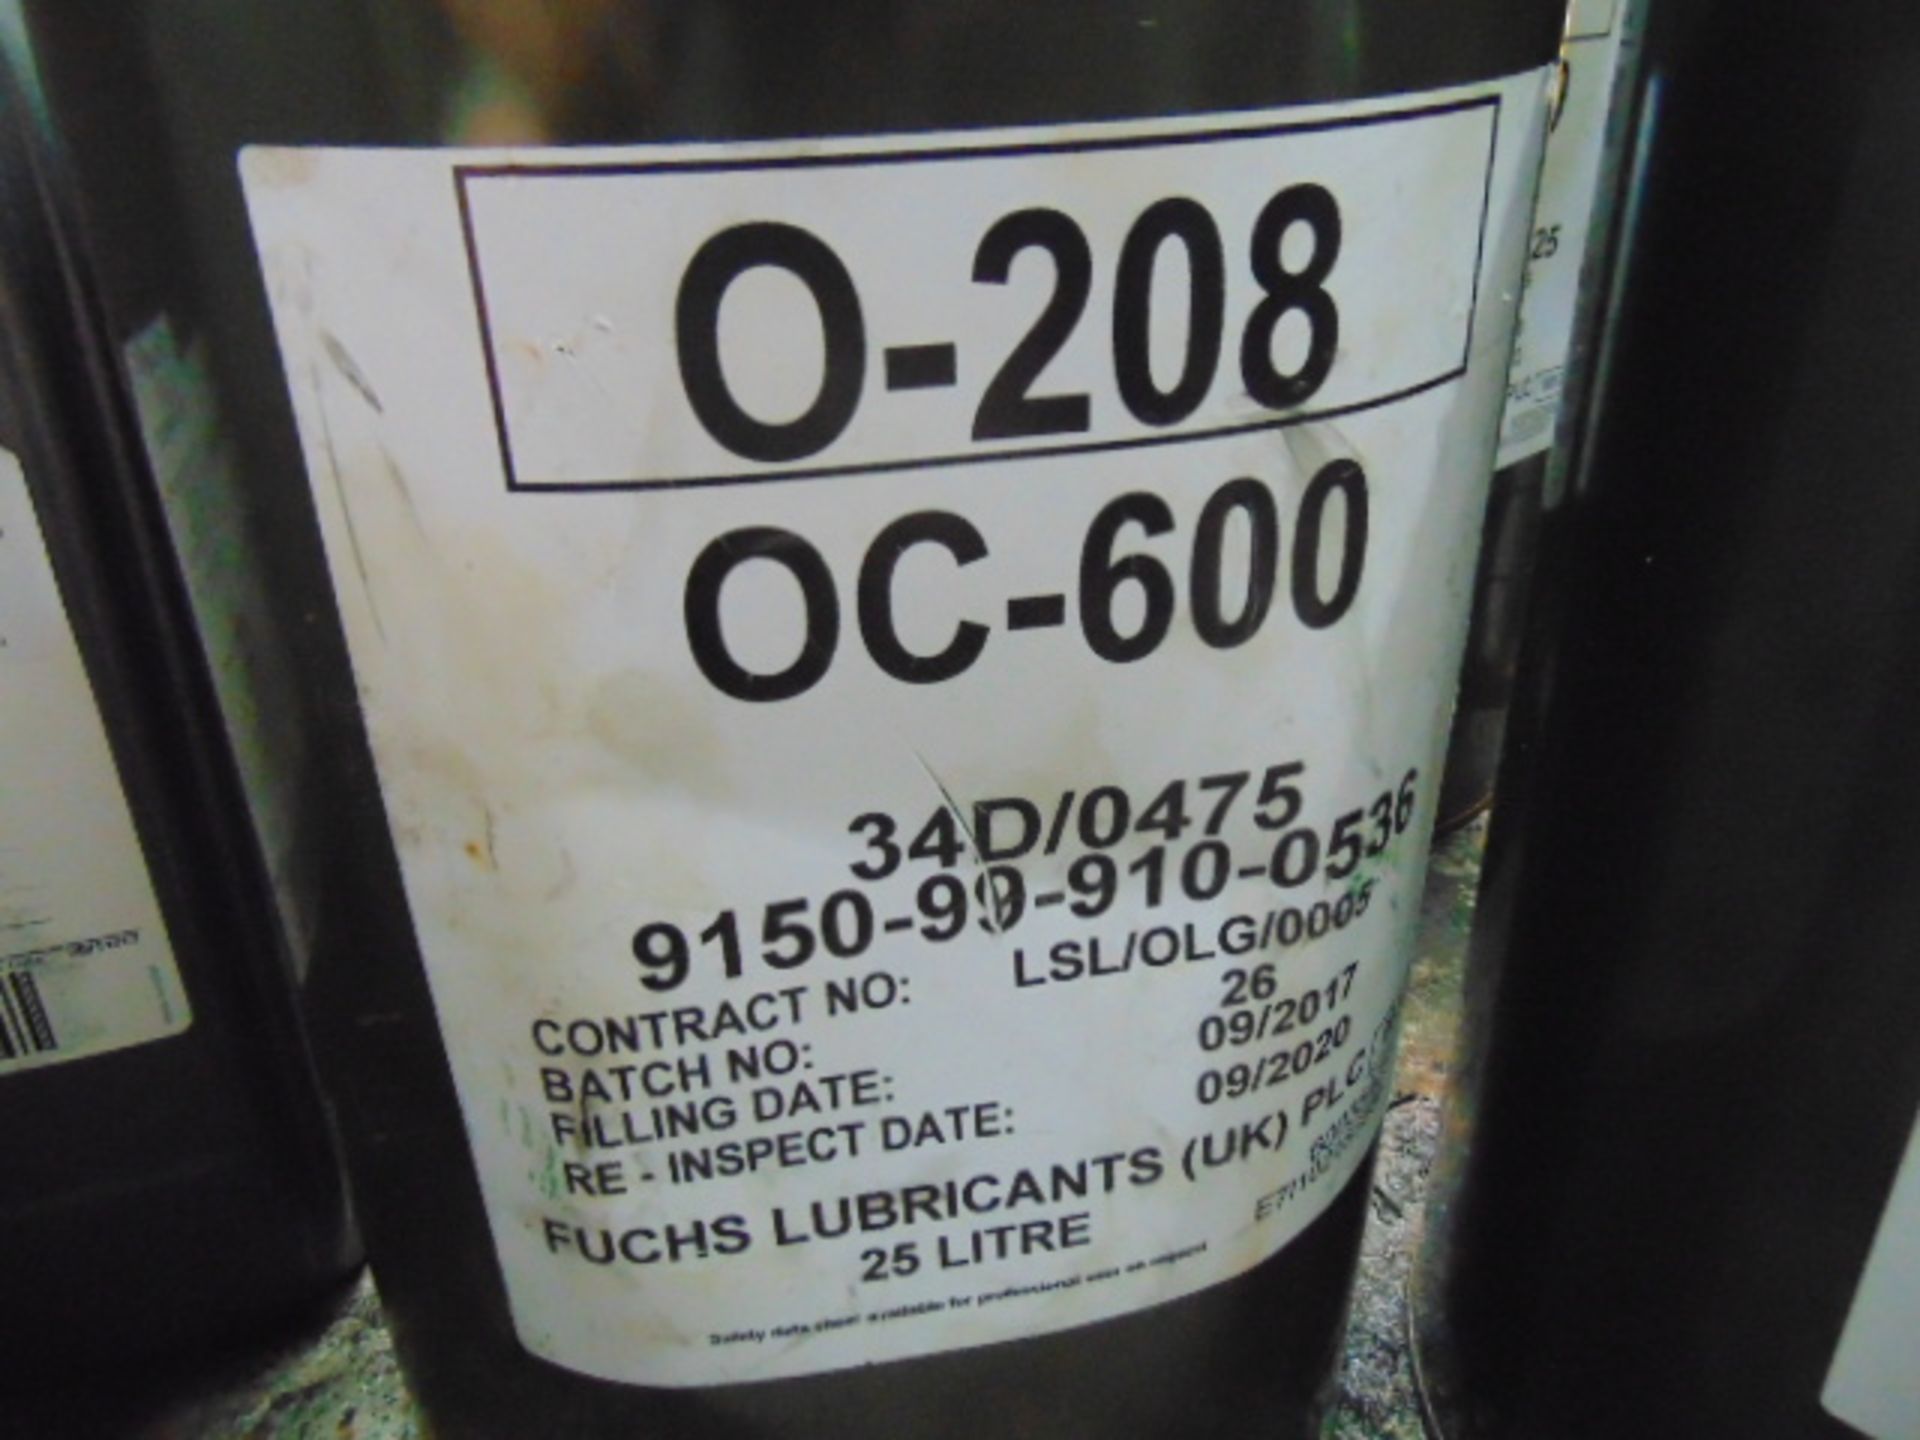 1 x Unissued 25L Drum of OC-600 High Performance Gear Lubricating Oil - Image 2 of 2